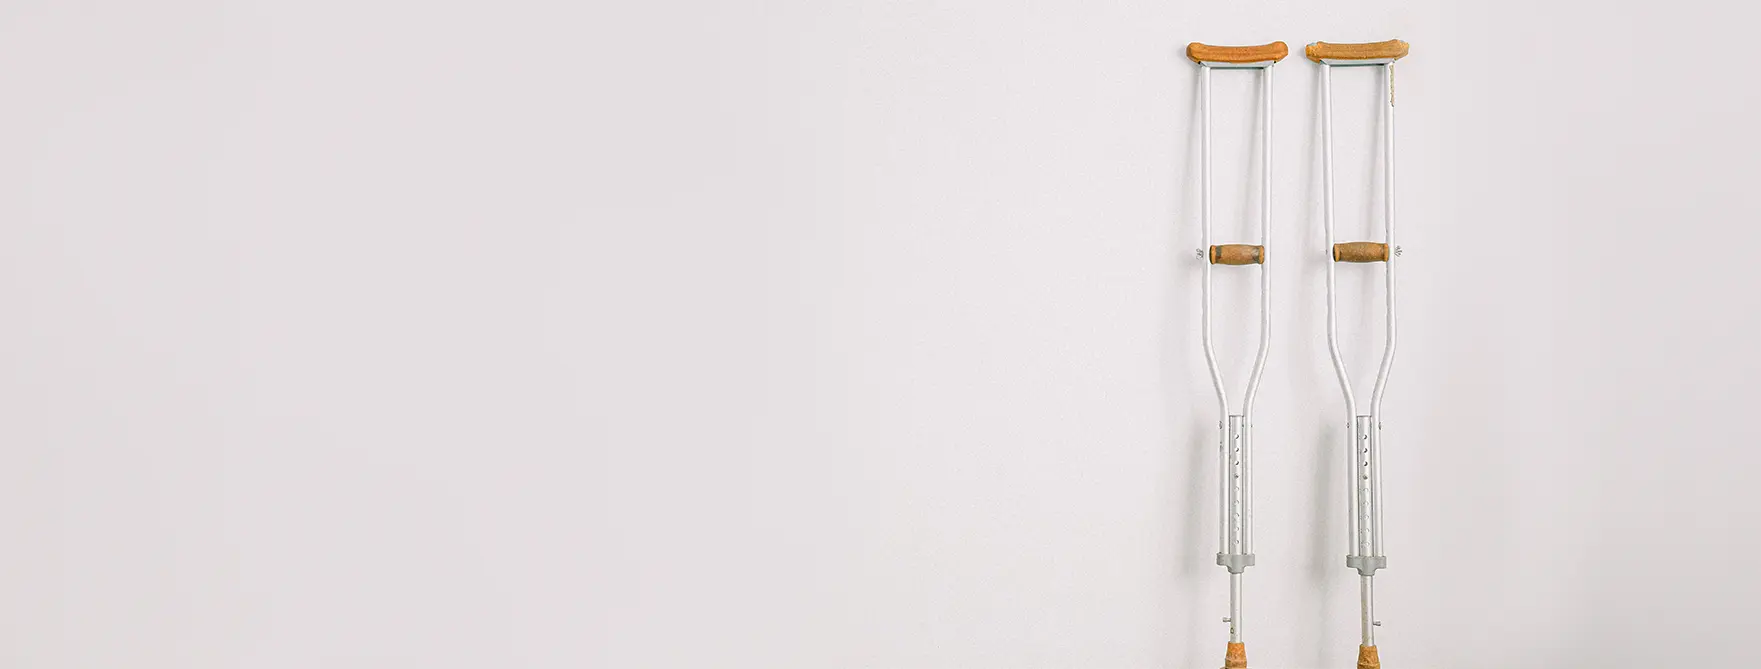 A pair of crutches leaning against a white wall.